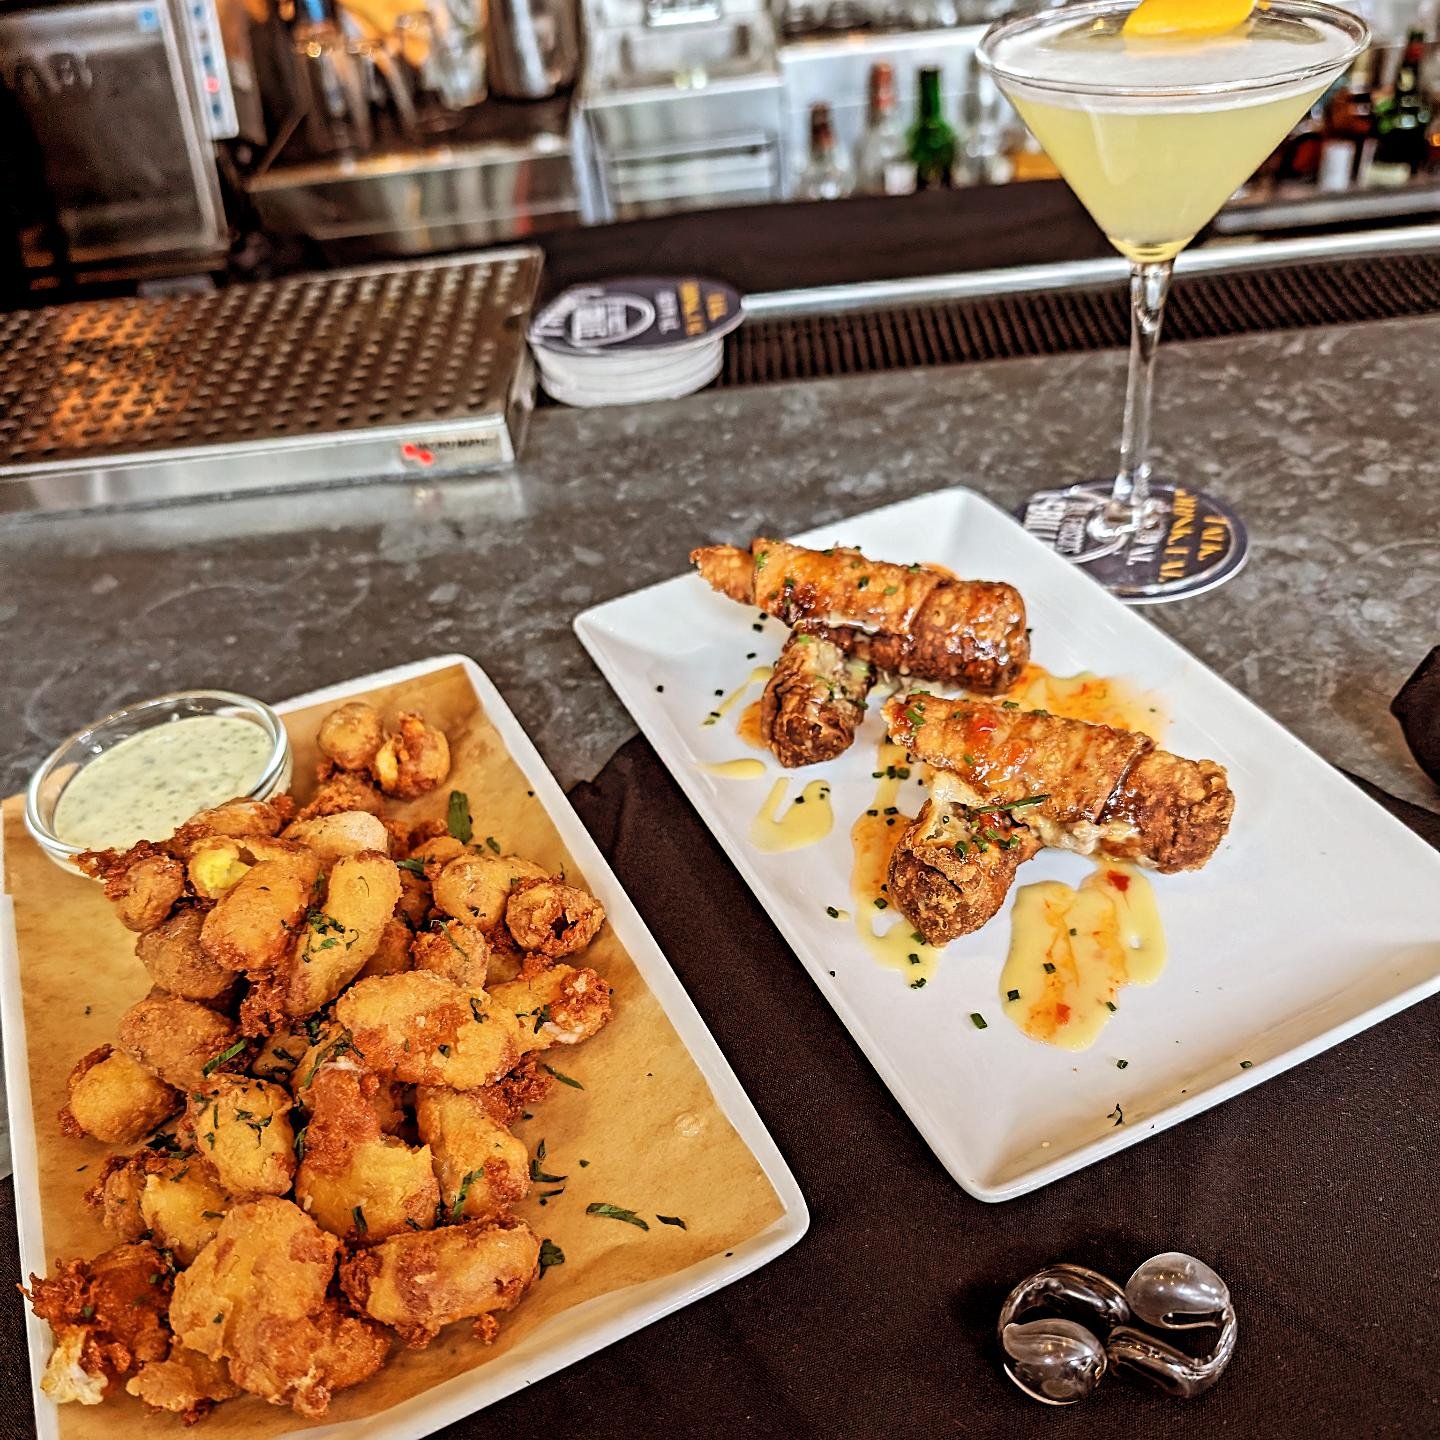 #tbt to yesterday after #pressjunkets and #sips with @baileys, I did another meeting and #happyhour was next on my list! @del.friscos is one of my faves and with @dfgrille being #downtown I had to have their classic #pineapple #martini, #cheesecurds 